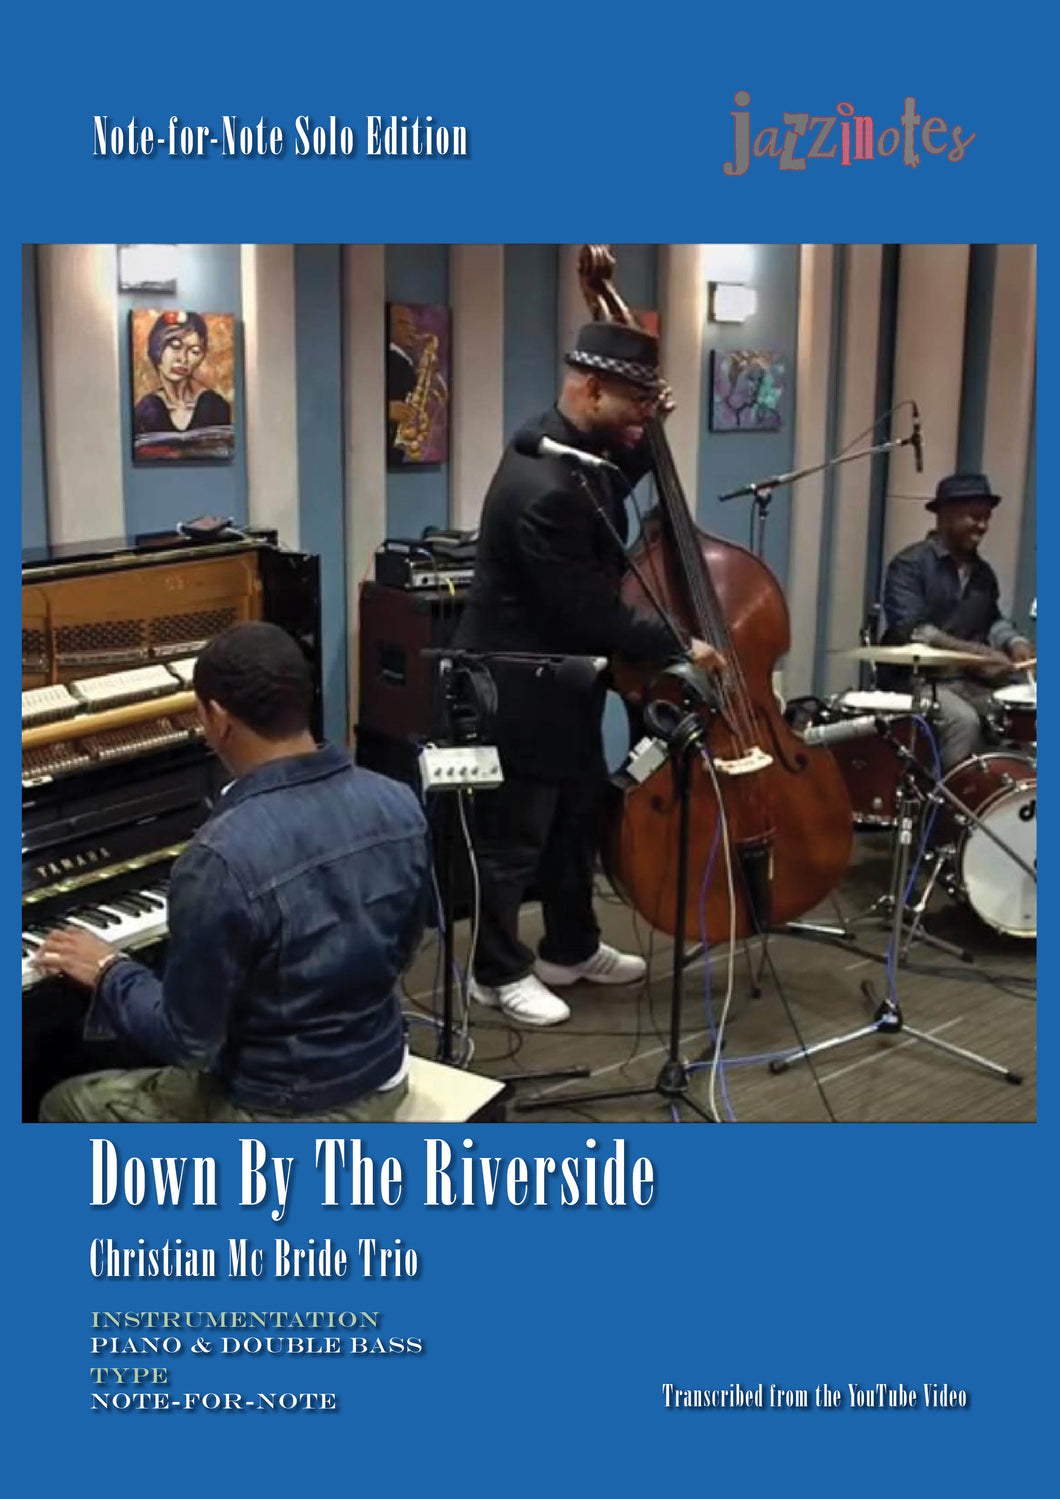 McBride, Christian, Trio: Down By The Riverside - Musiknoten Download